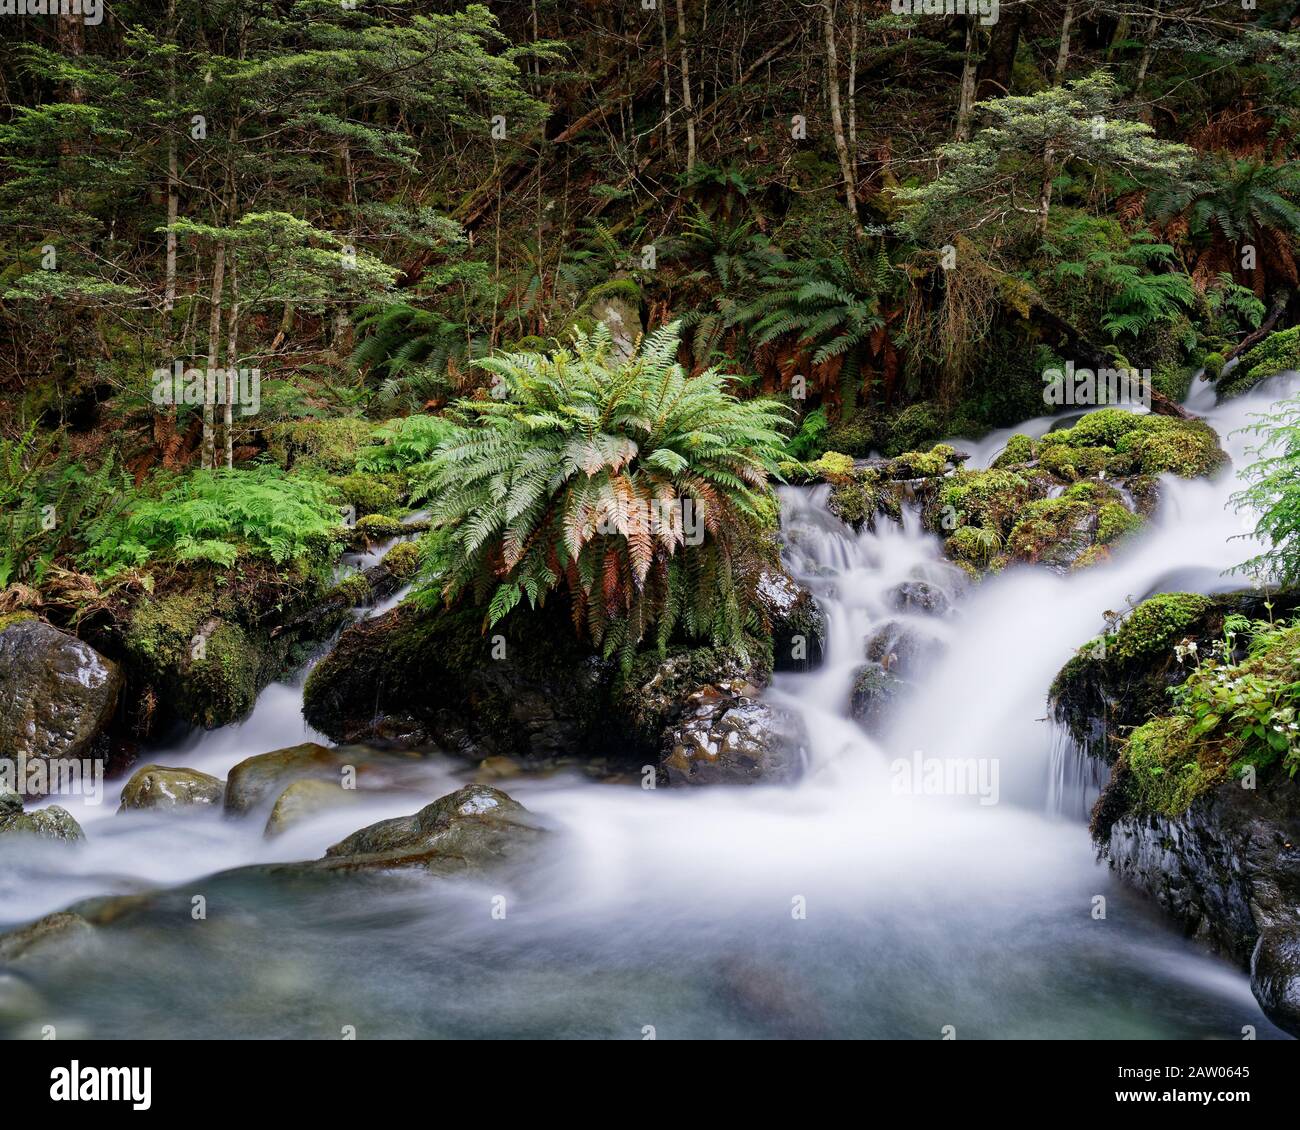 A fern on a rock by a Waterfall on an unnamed creek in Kahurangi National Park, New Zealand. Stock Photo